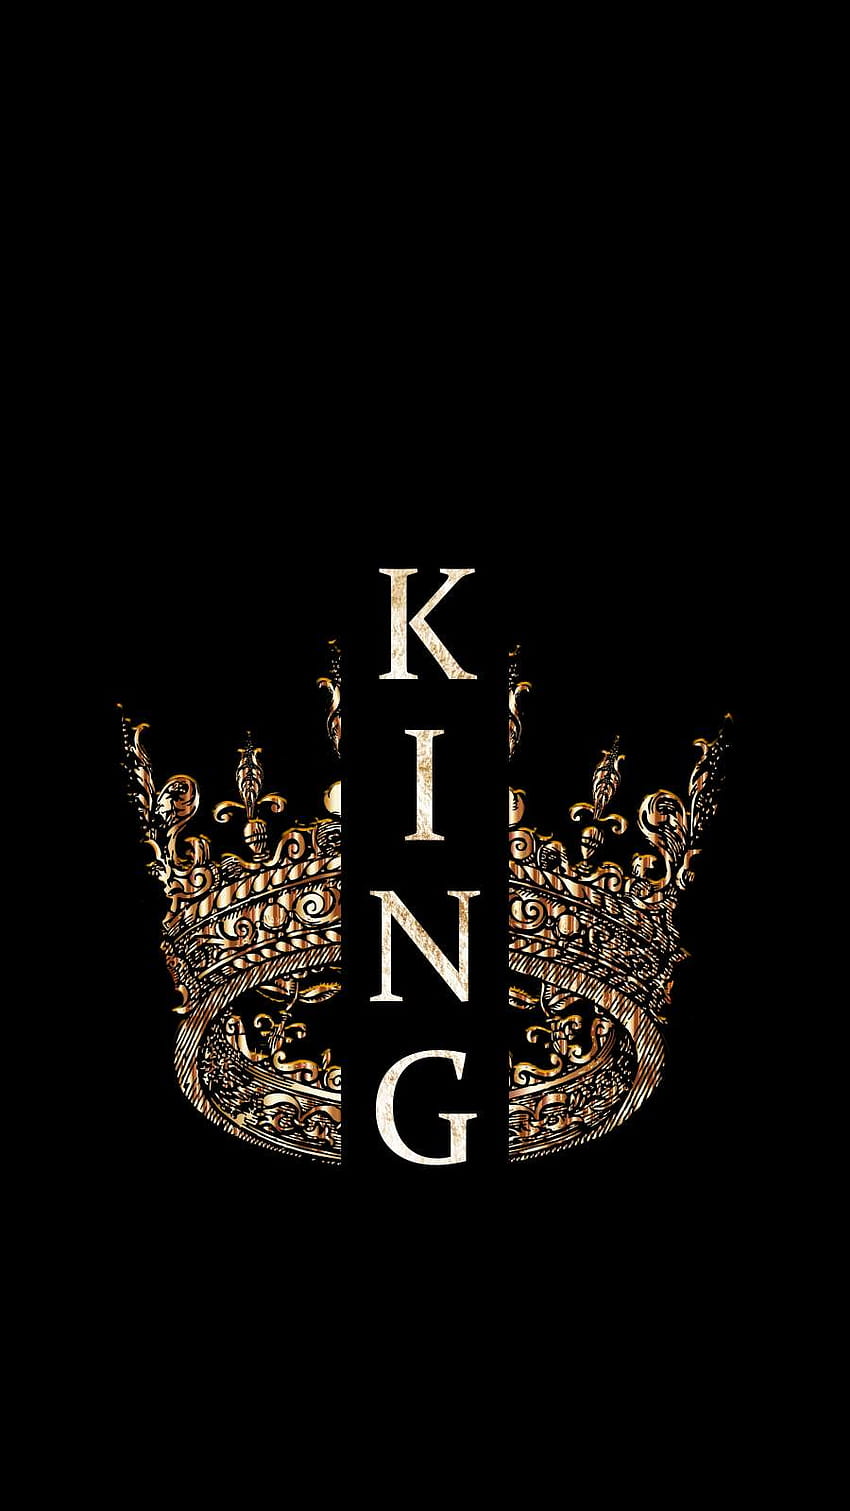 King Wallpapers  Top 15 Best King Wallpapers  HQ 